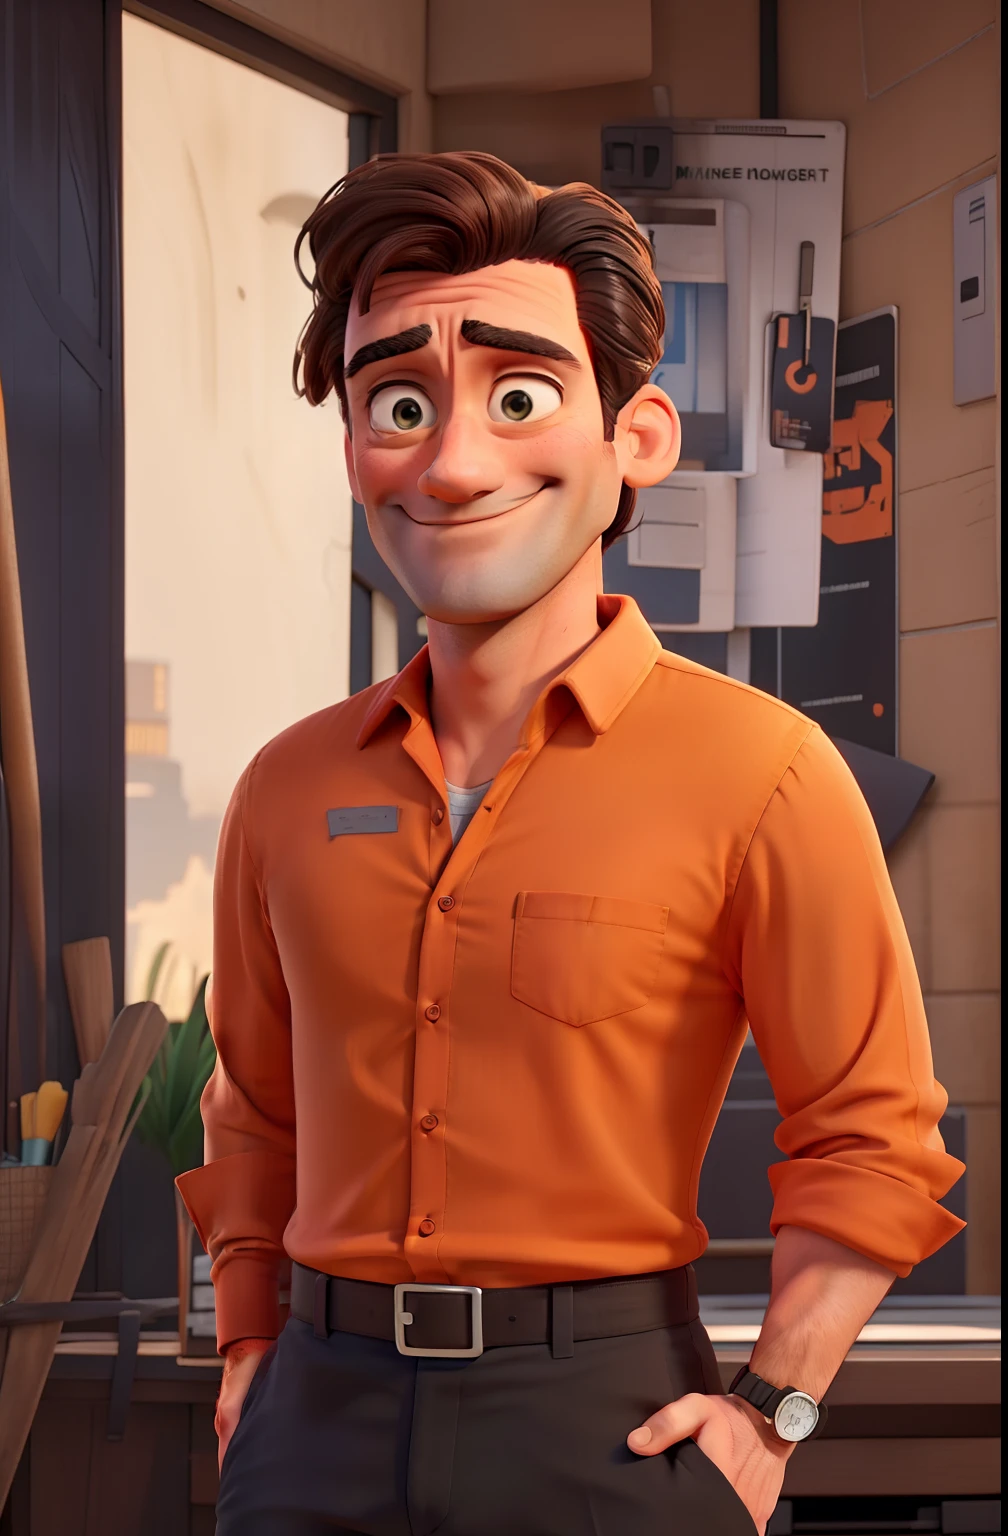 Jon Hamm dressed in an orange shirt and black pants, smiling and pointing to the side with the index finger